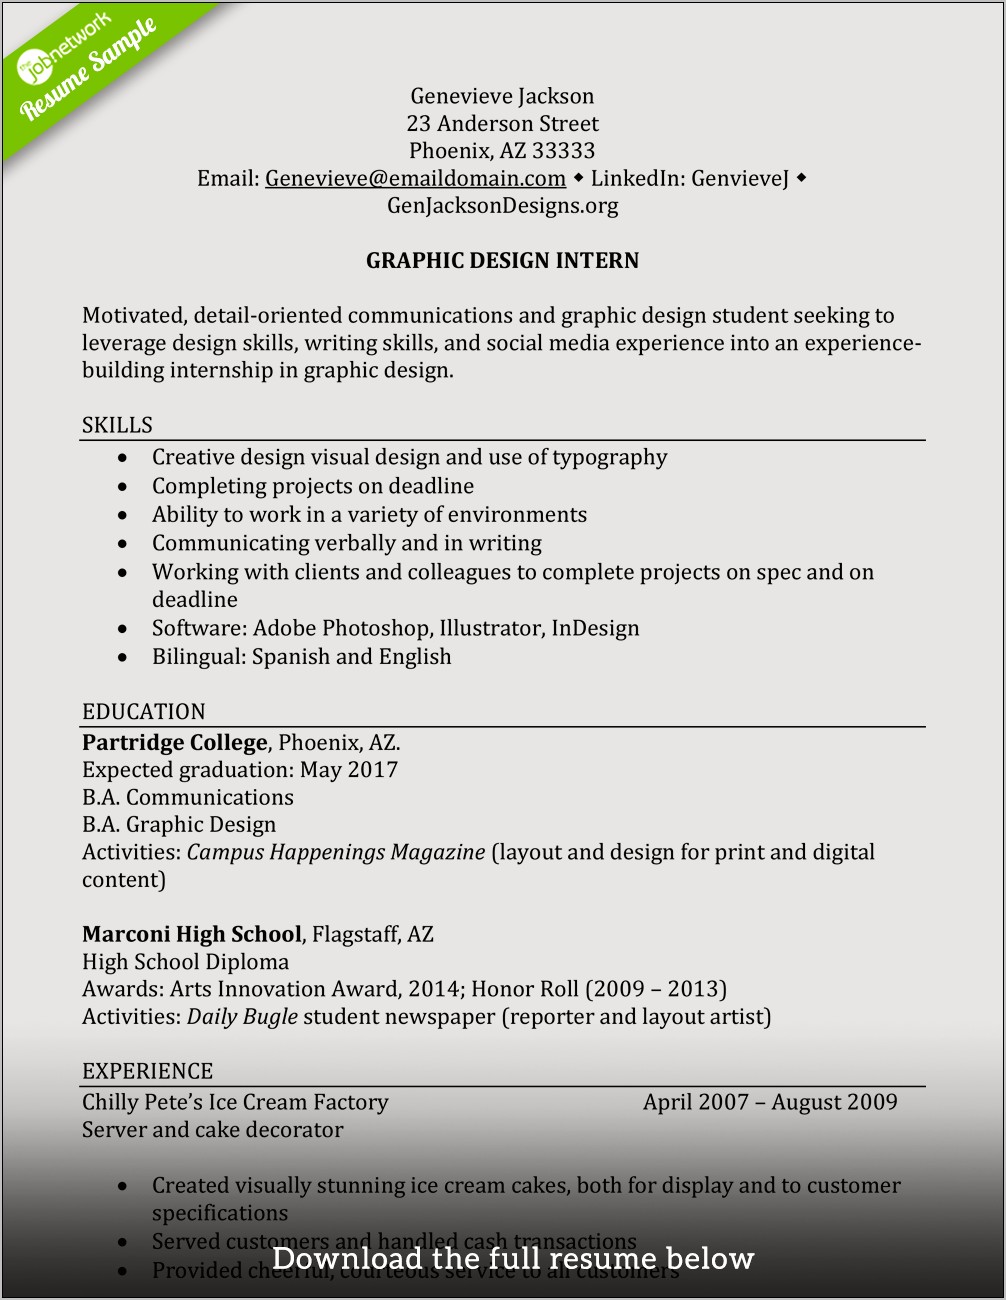 Resumes For College Students Looking For Summer Job